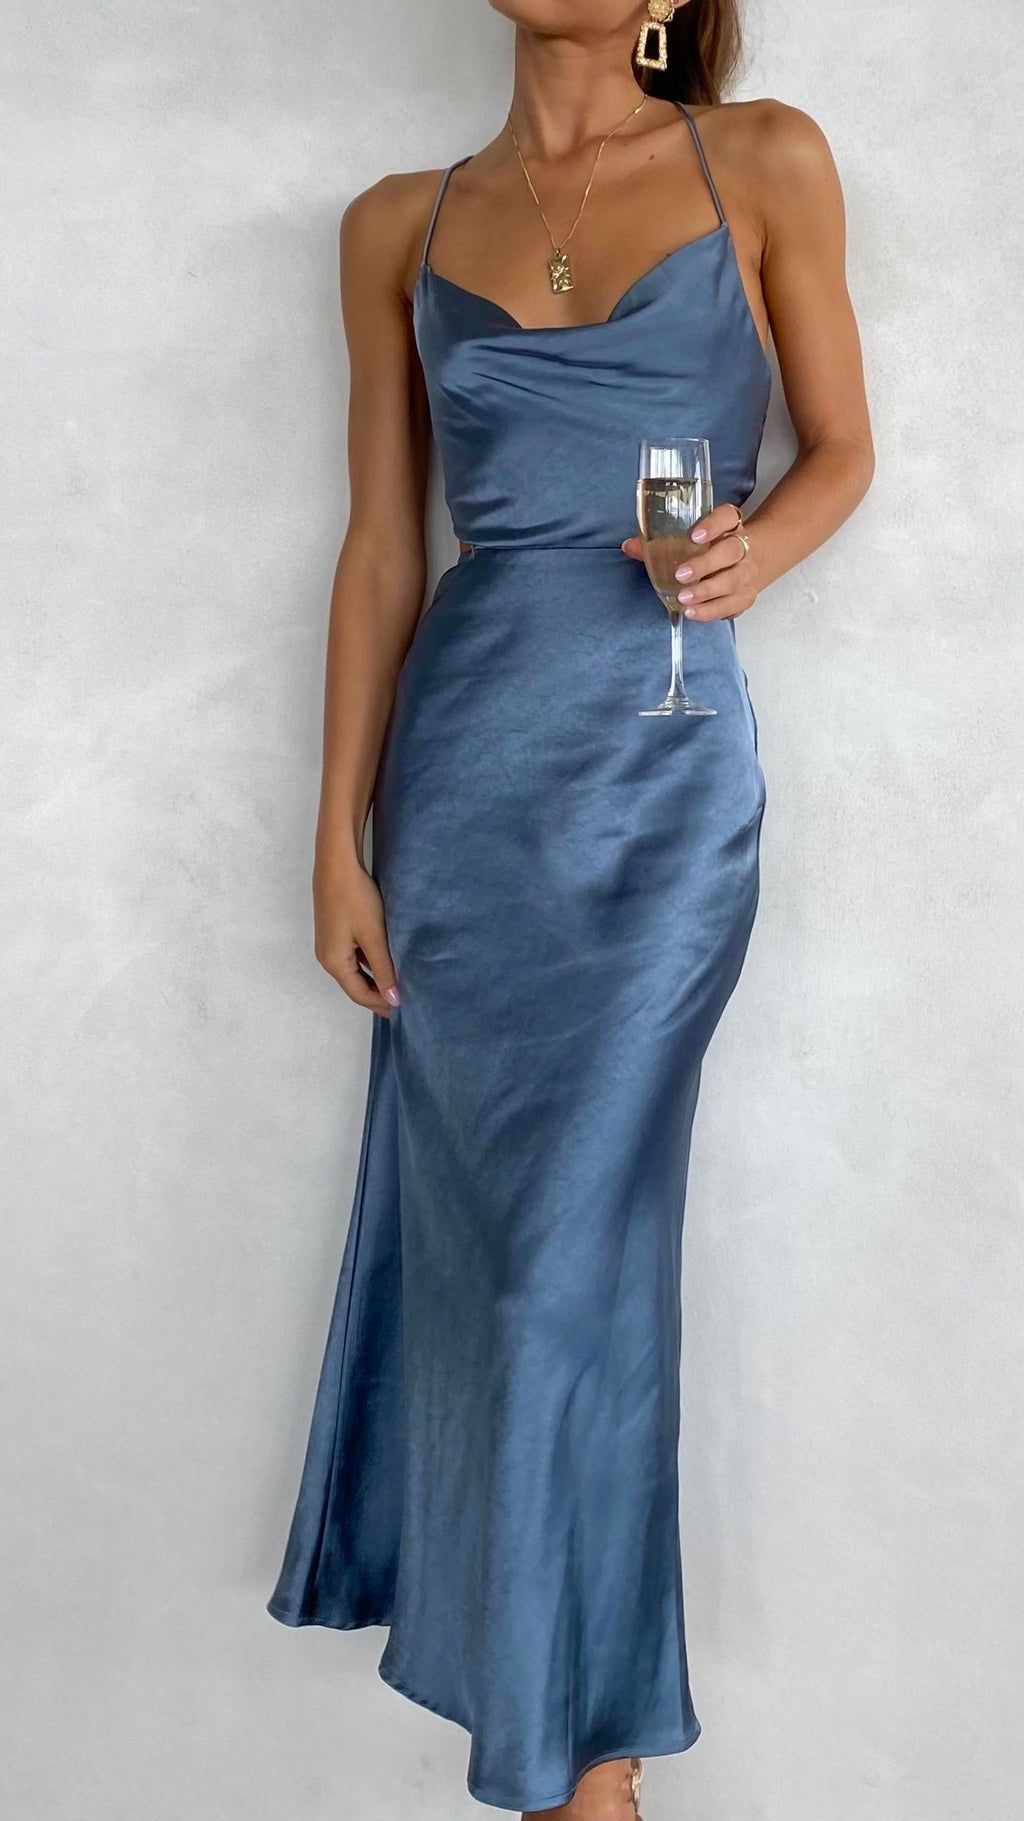 Make a Statement at Any Event with Cocktail Dresses